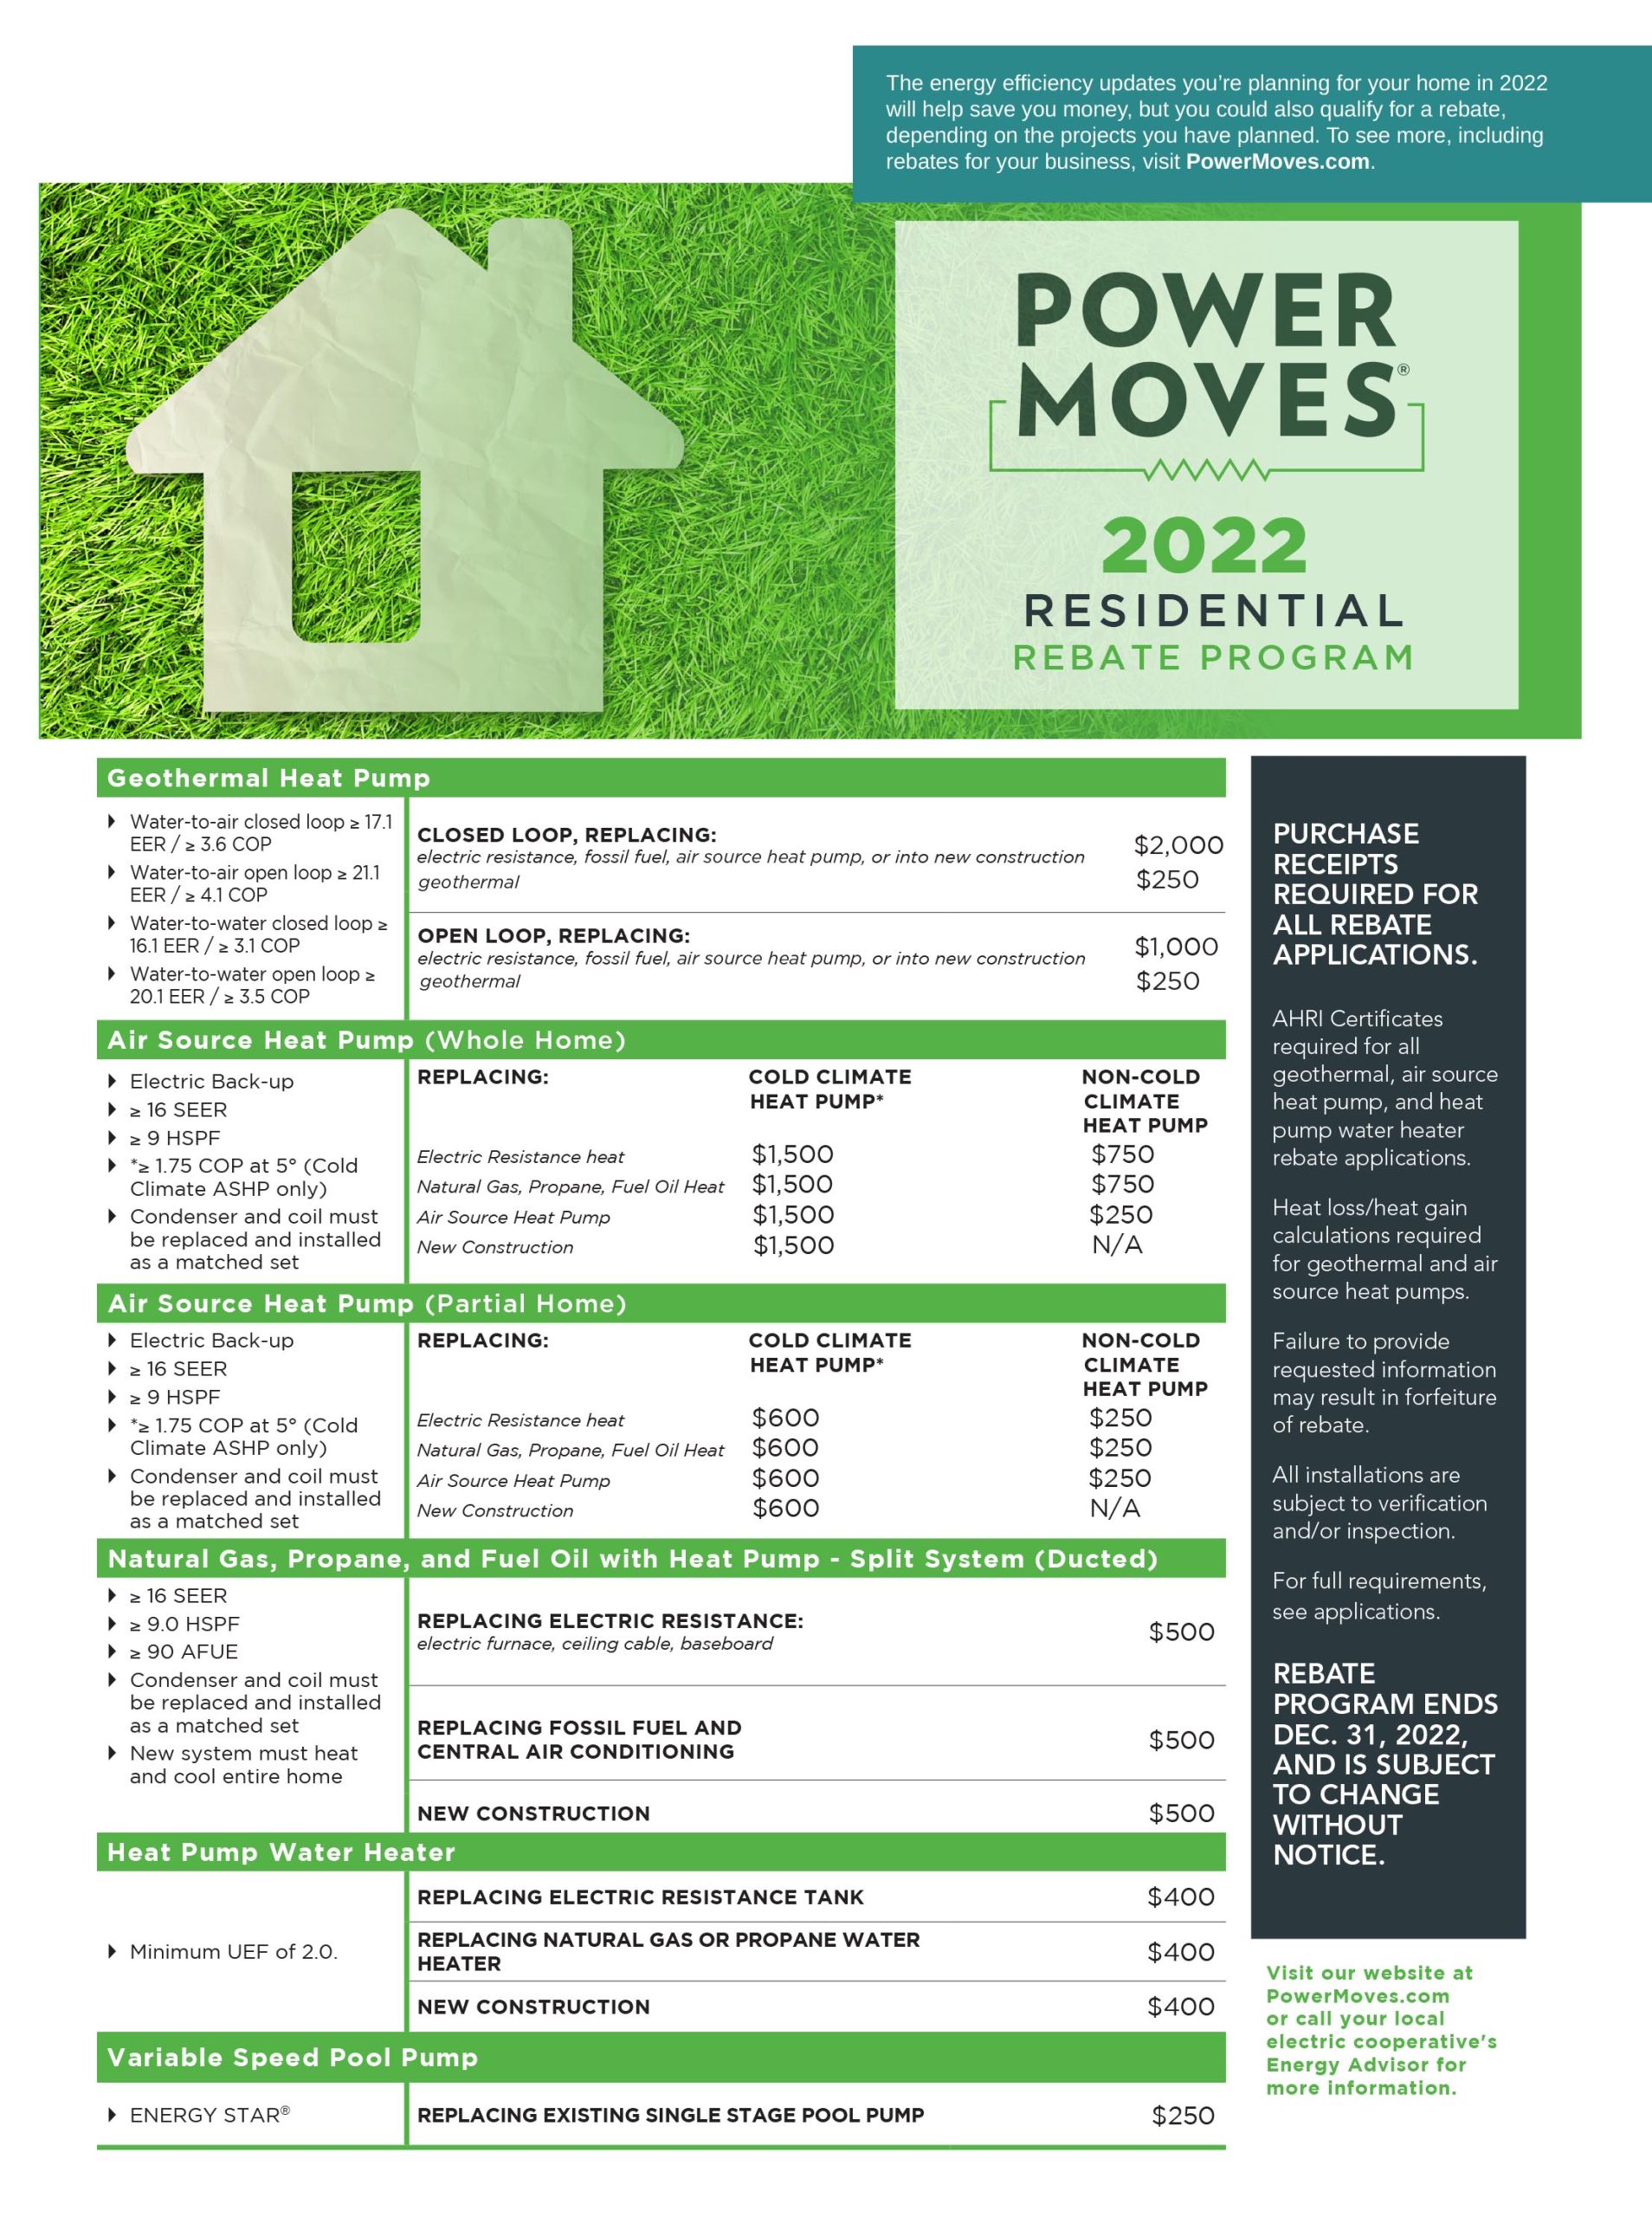 2018-power-moves-rebates-indiana-connection